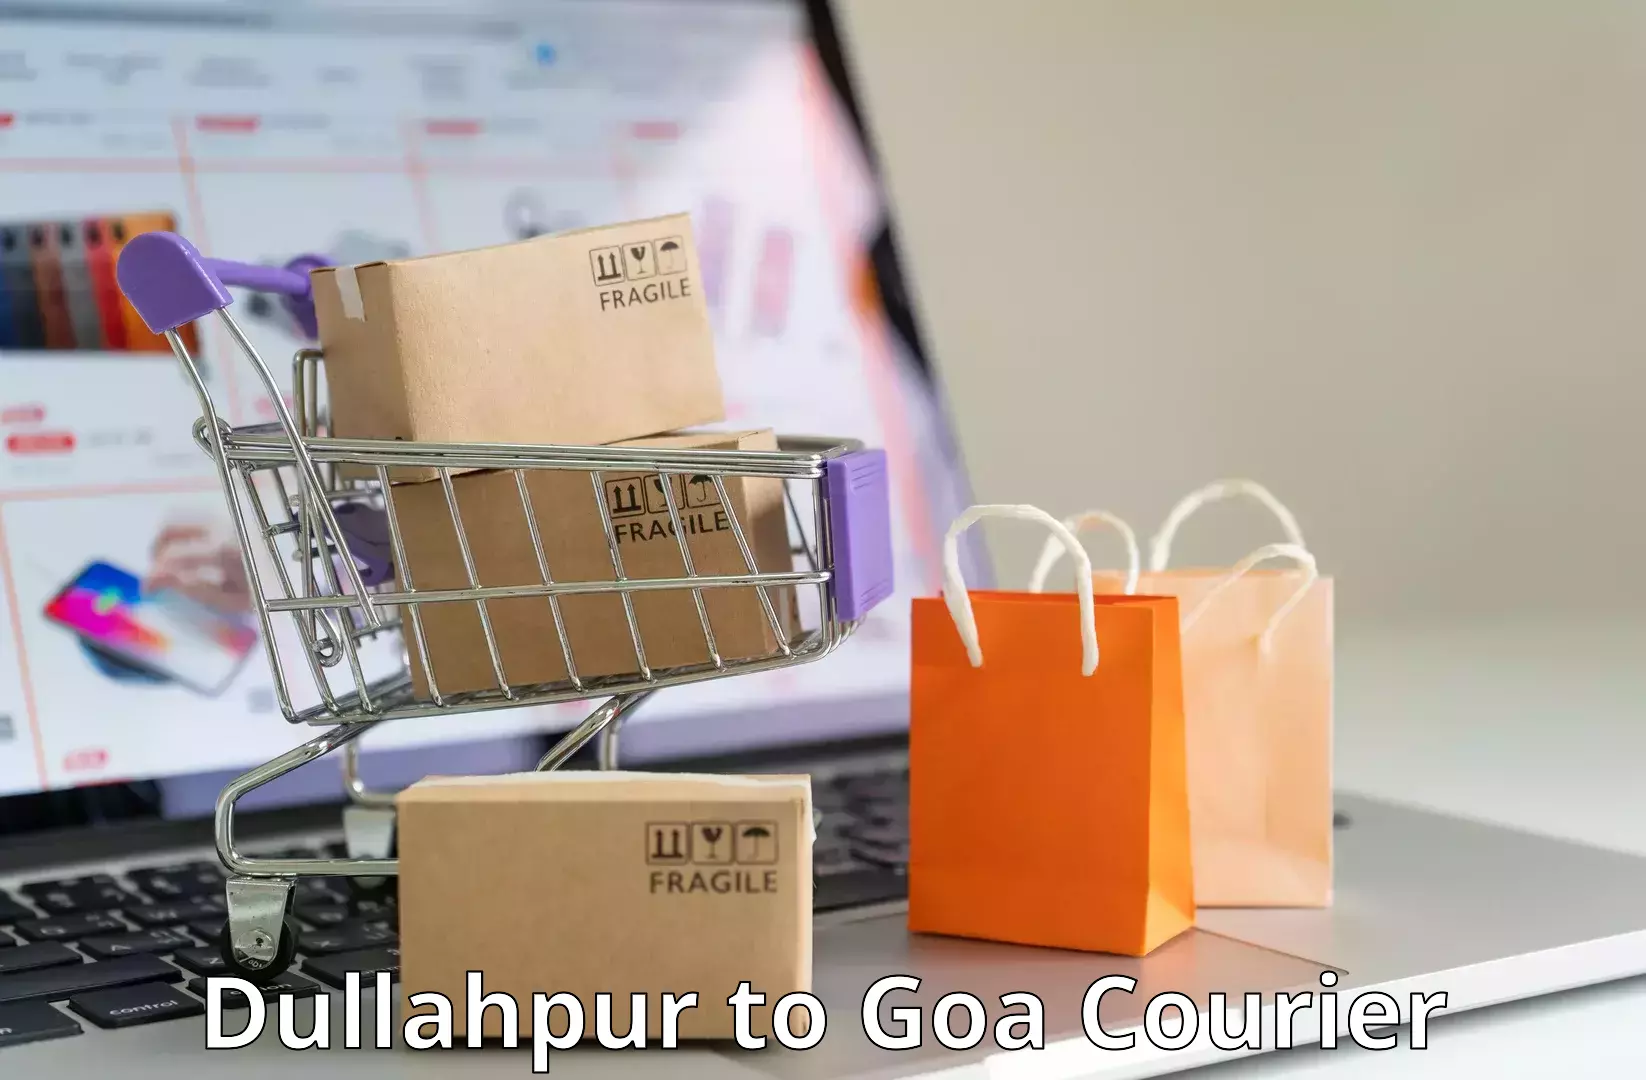 Express package transport Dullahpur to Goa